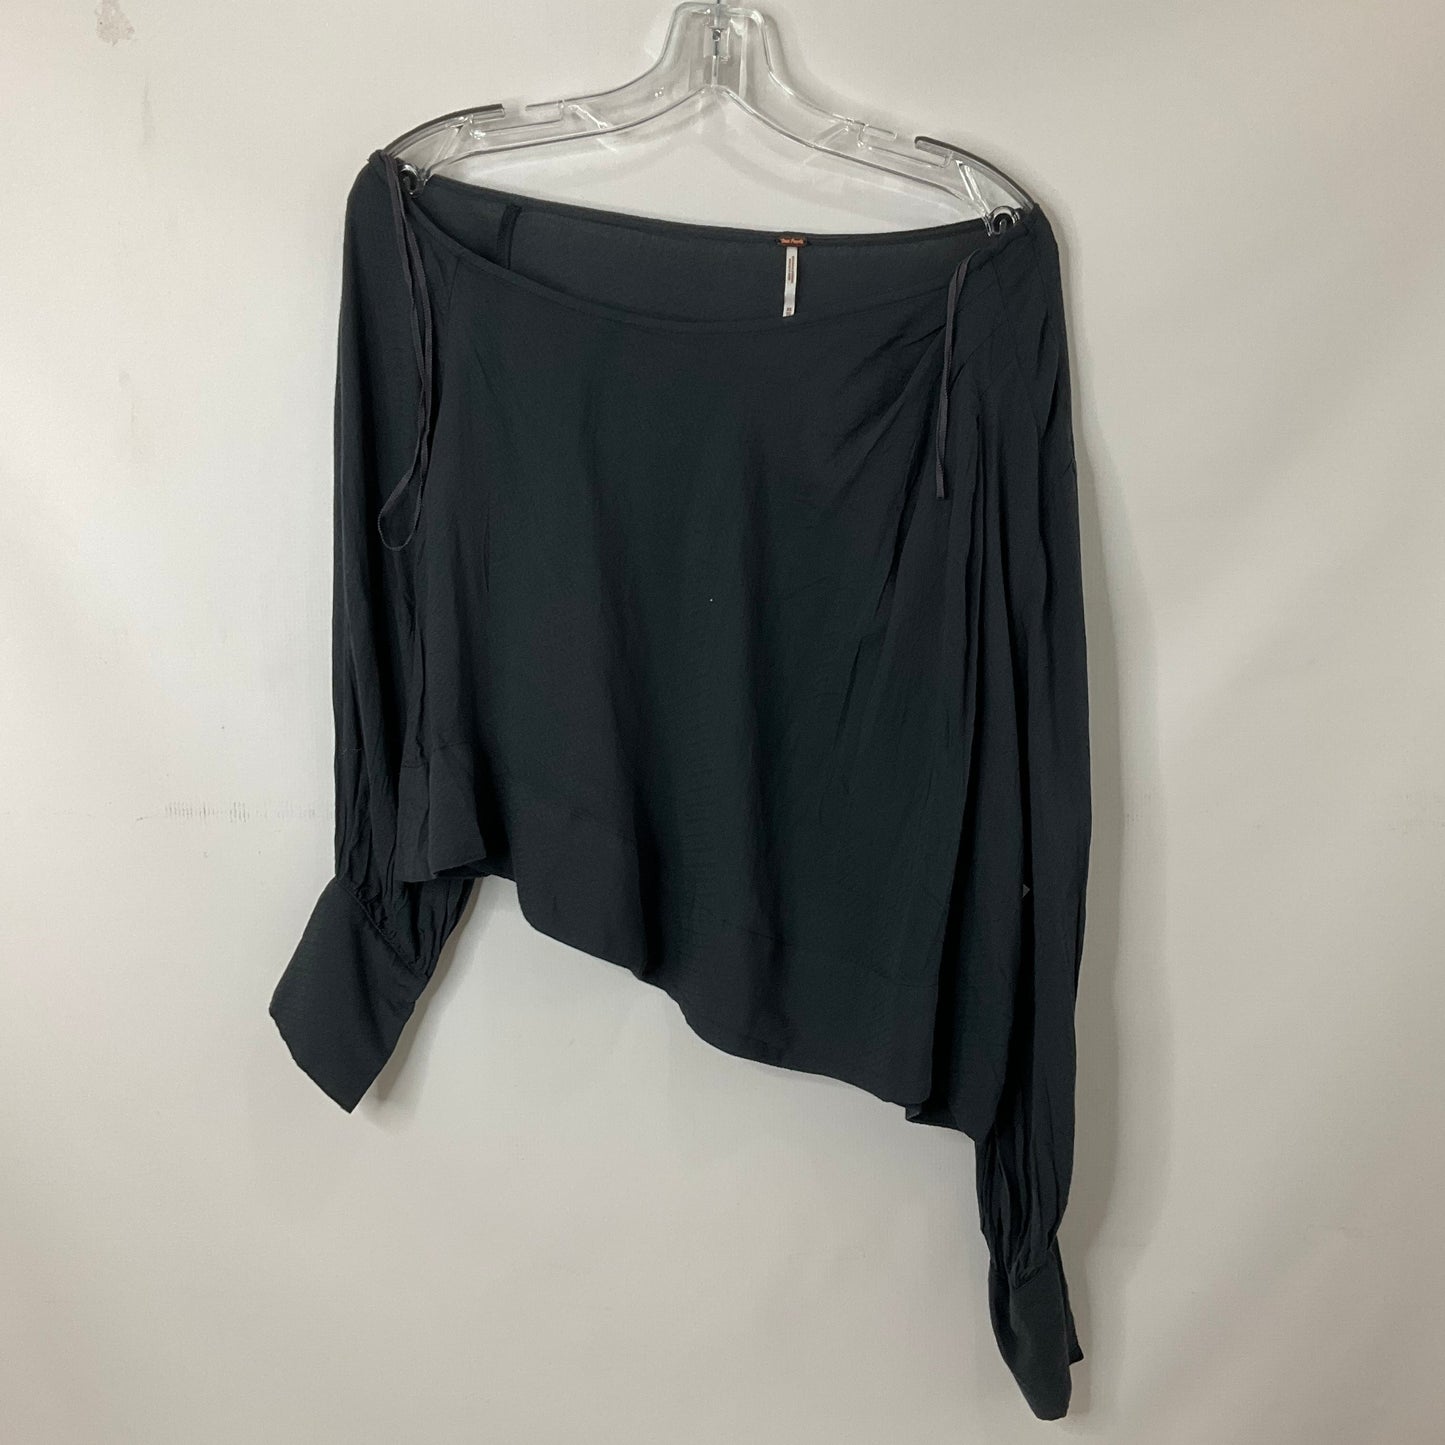 Grey Top Long Sleeve Free People, Size Xs